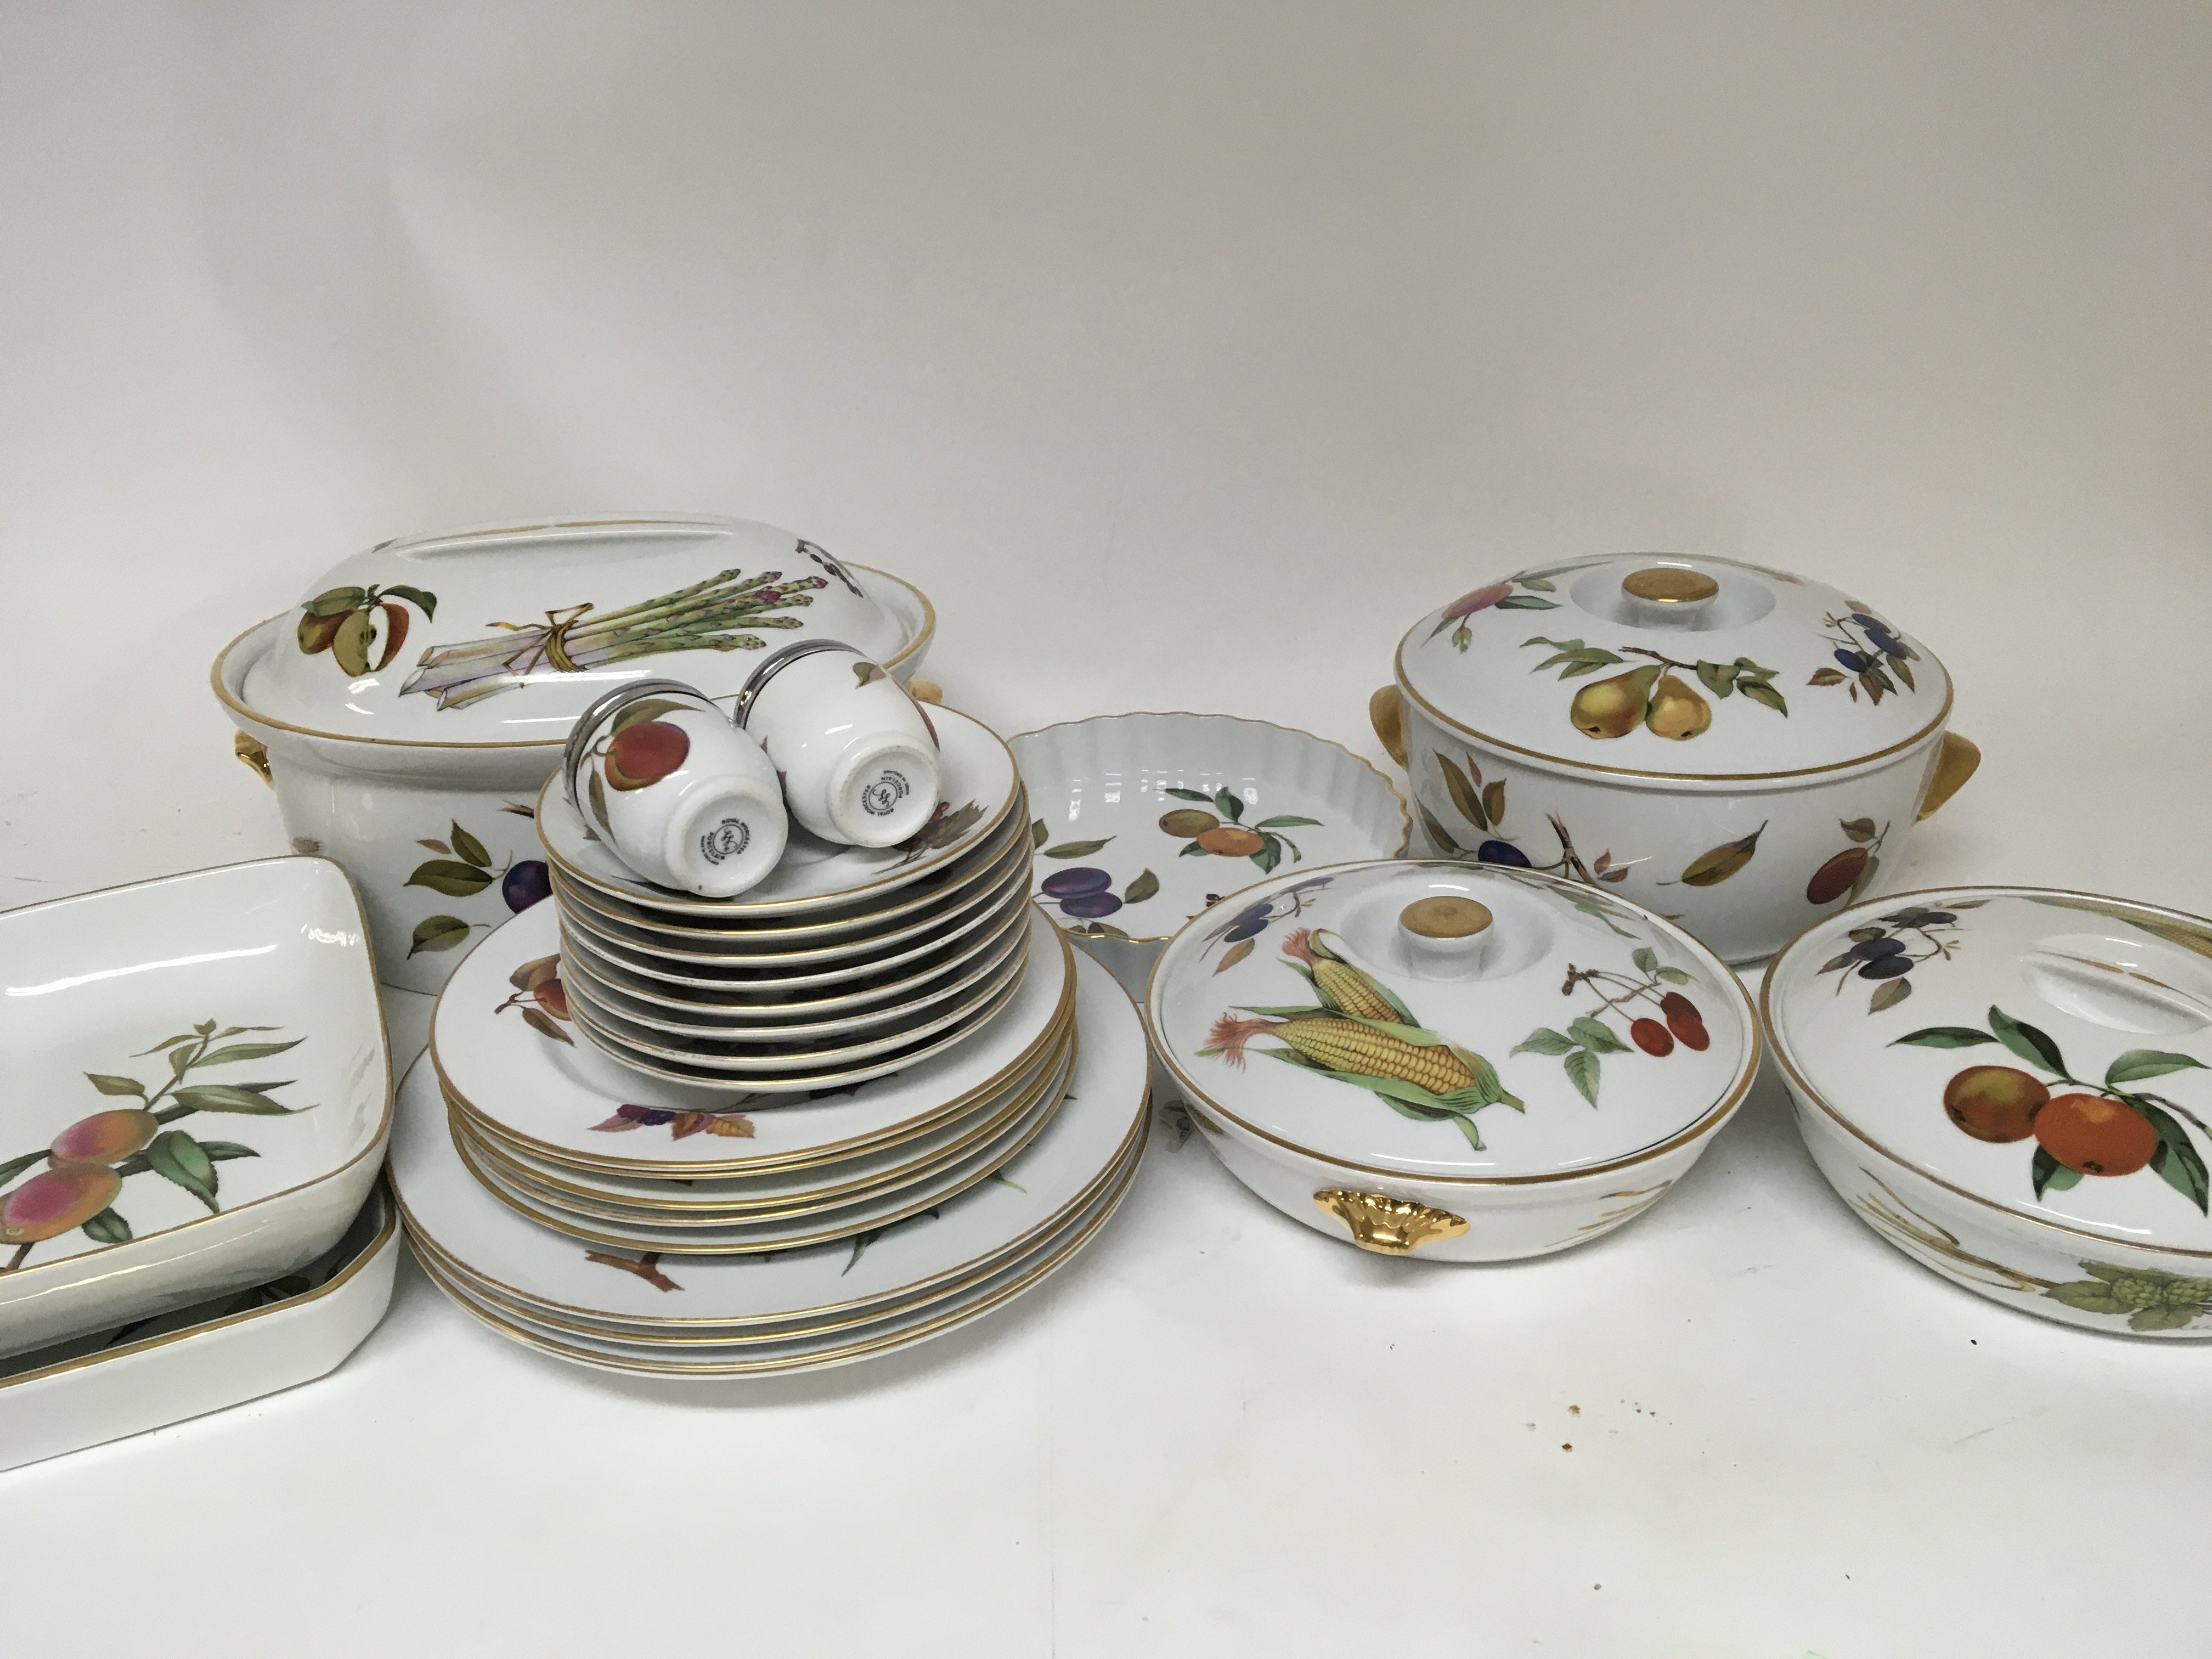 An Extensive Royal Worcester Evesham pattern diner and tea service with vegetable dishes